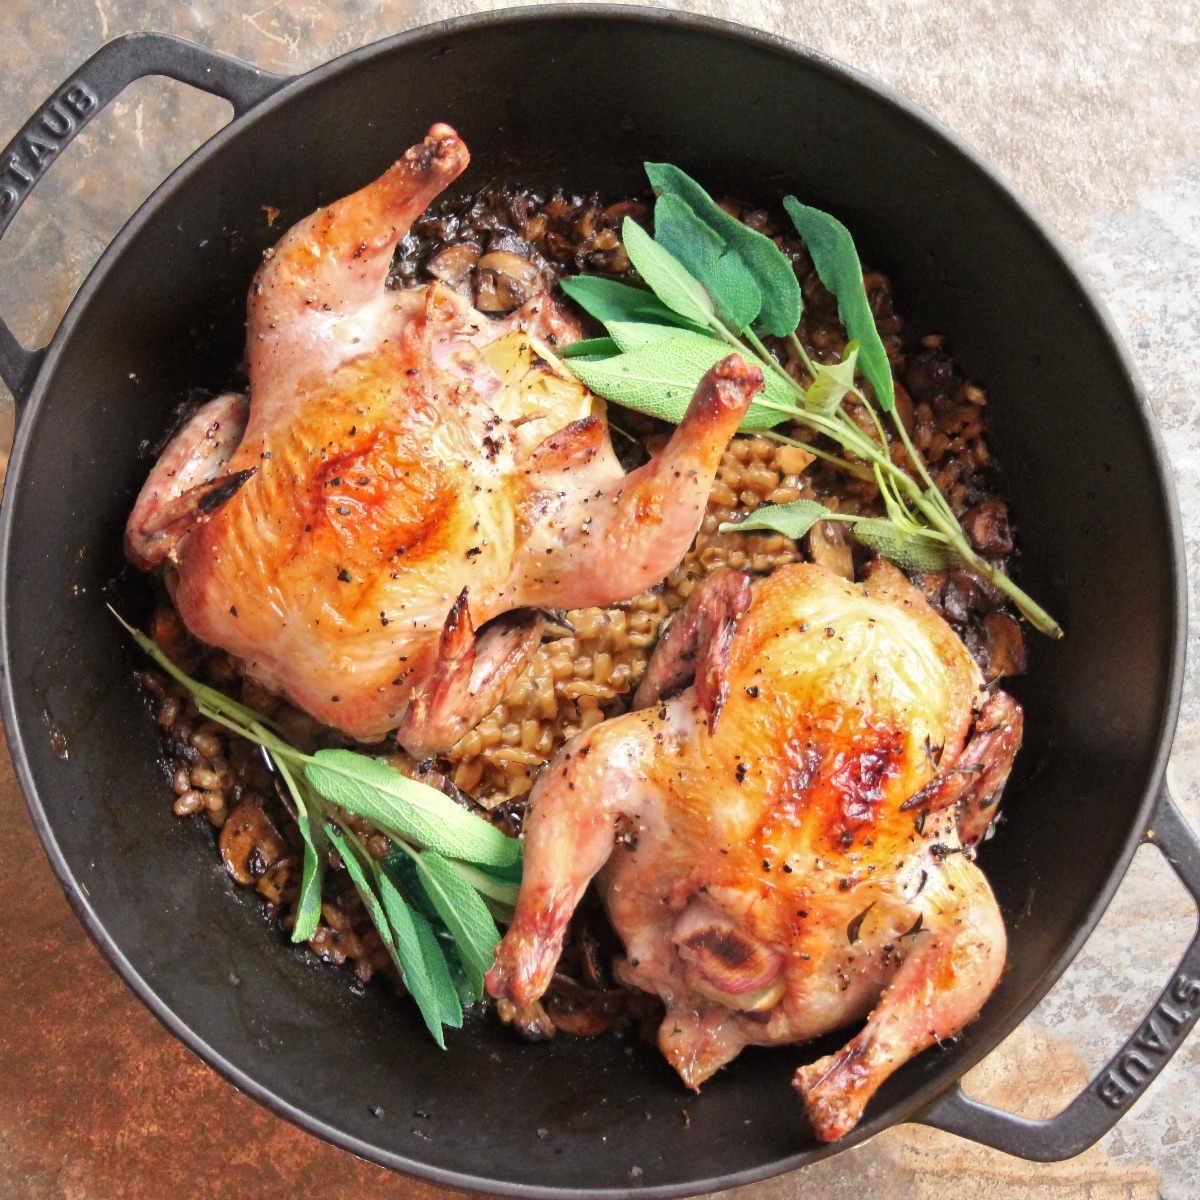 Two Cornish Game Hens in a skillet with mushroom barley pilaf and two sprigs of sage.